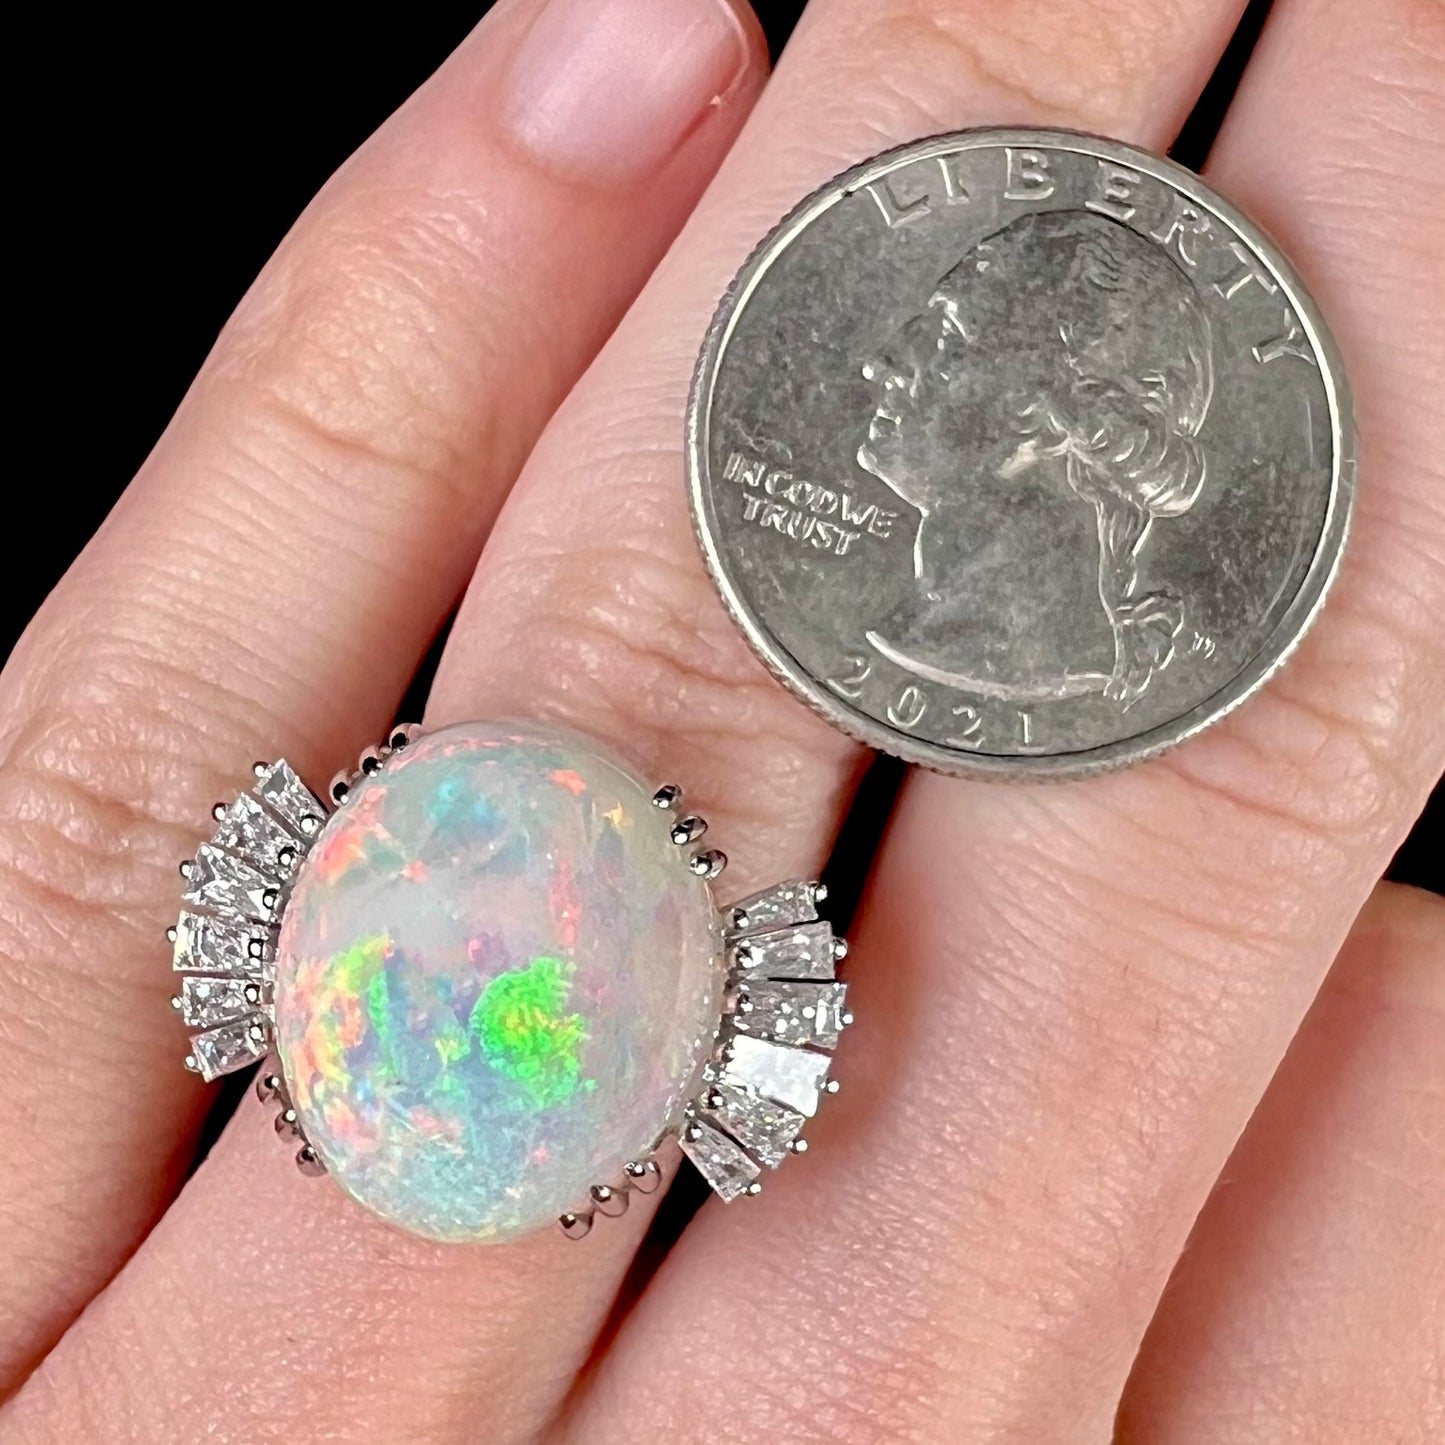 An oval cabochon cut opal mounted in a ladies' white gold ring between tapered baguette cut diamonds.